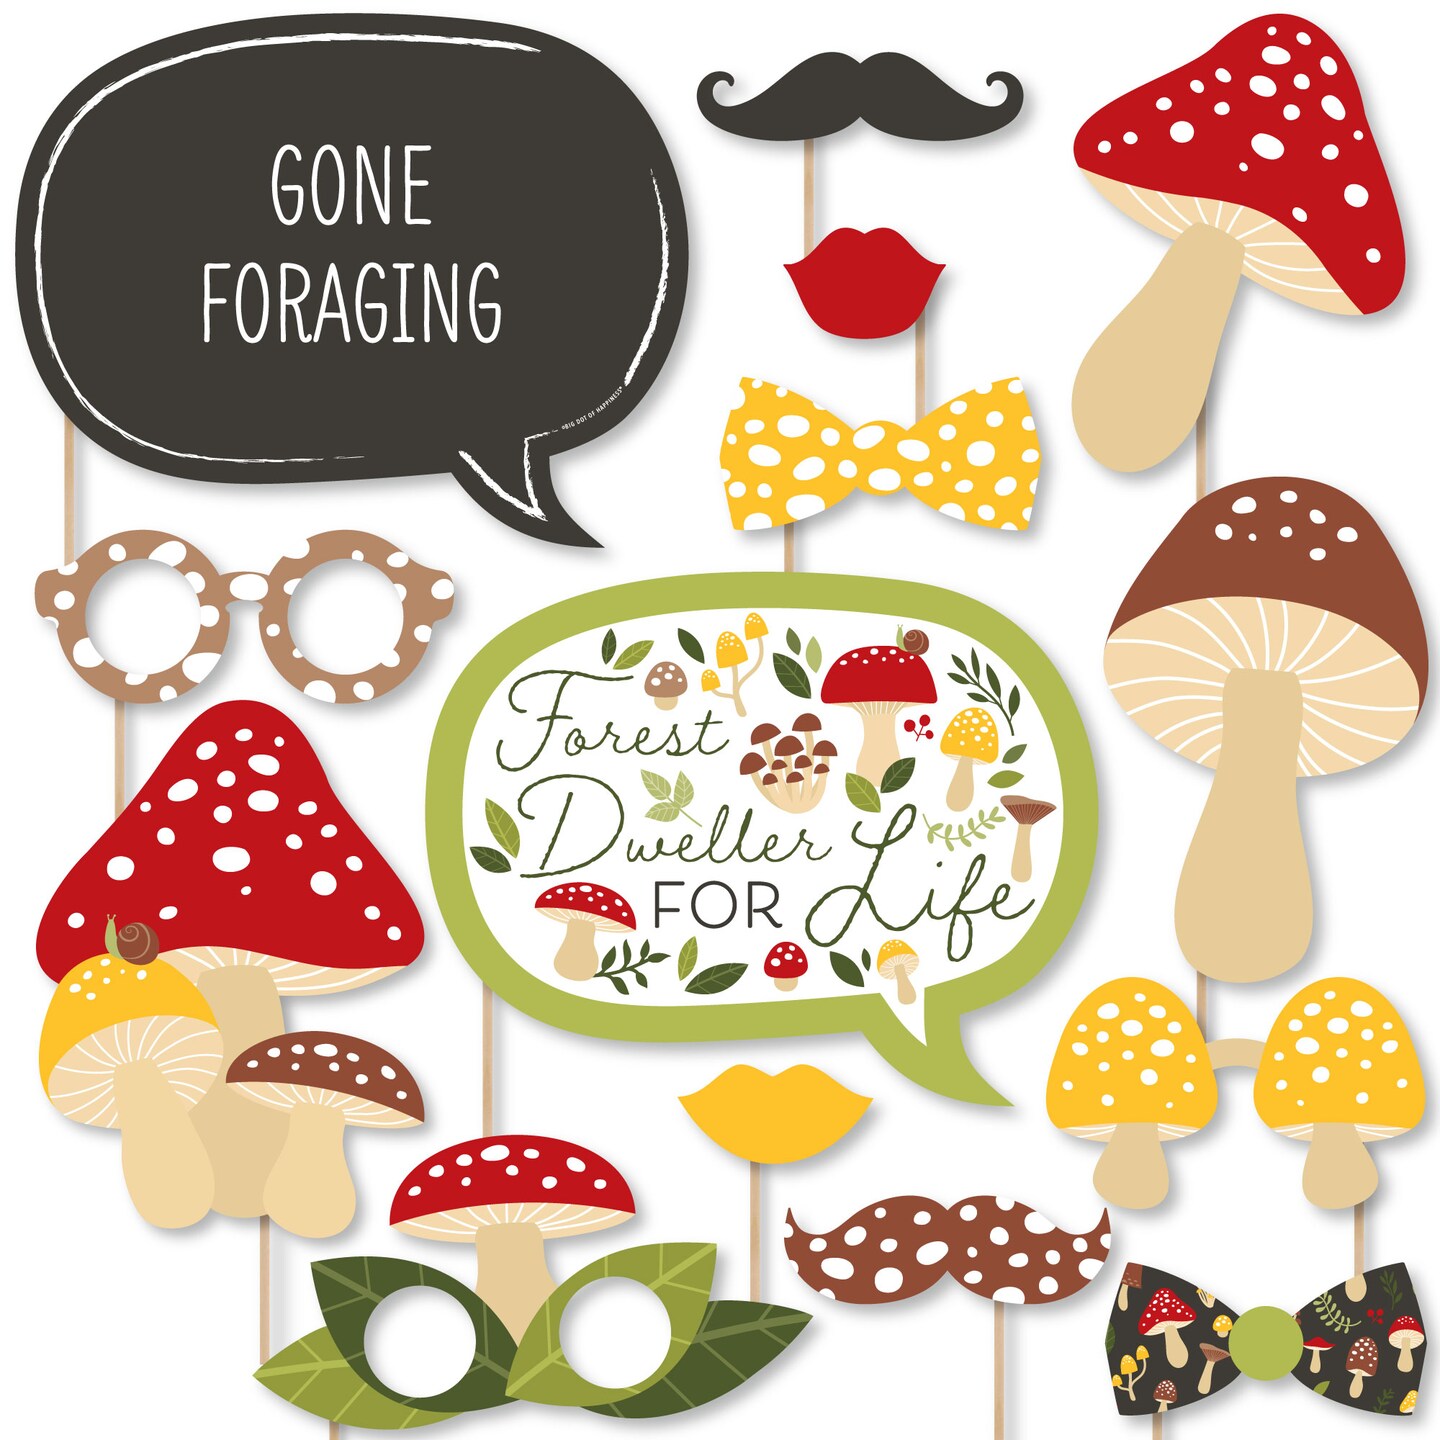 Big Dot of Happiness Wild Mushrooms - Red Toadstool Party Photo Booth Props Kit - 20 Count